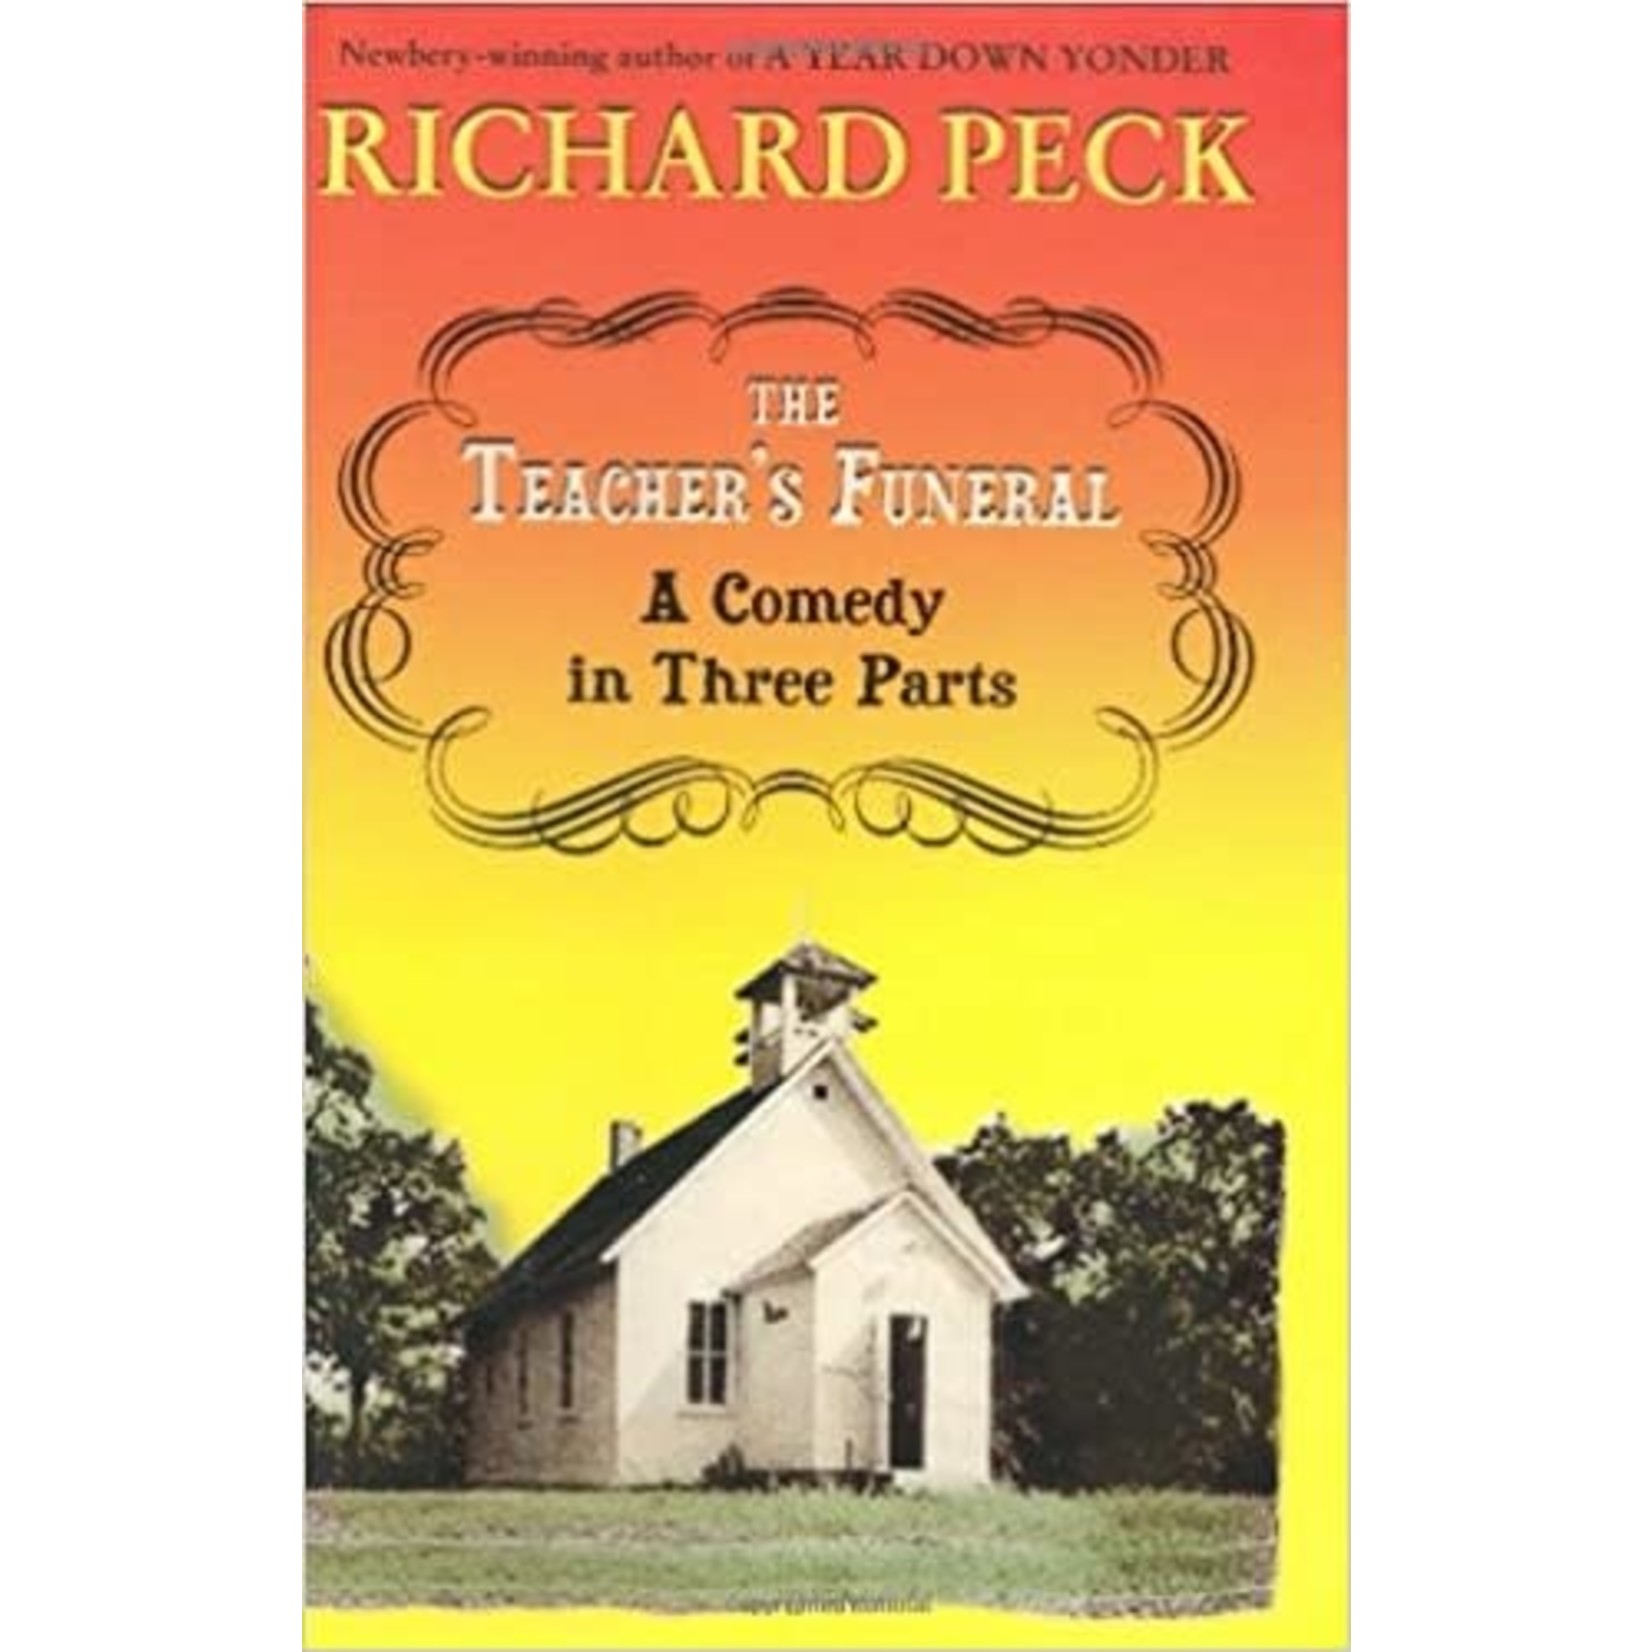 Richard Peck The Teacher's Funeral  A Comedy in Three Parts